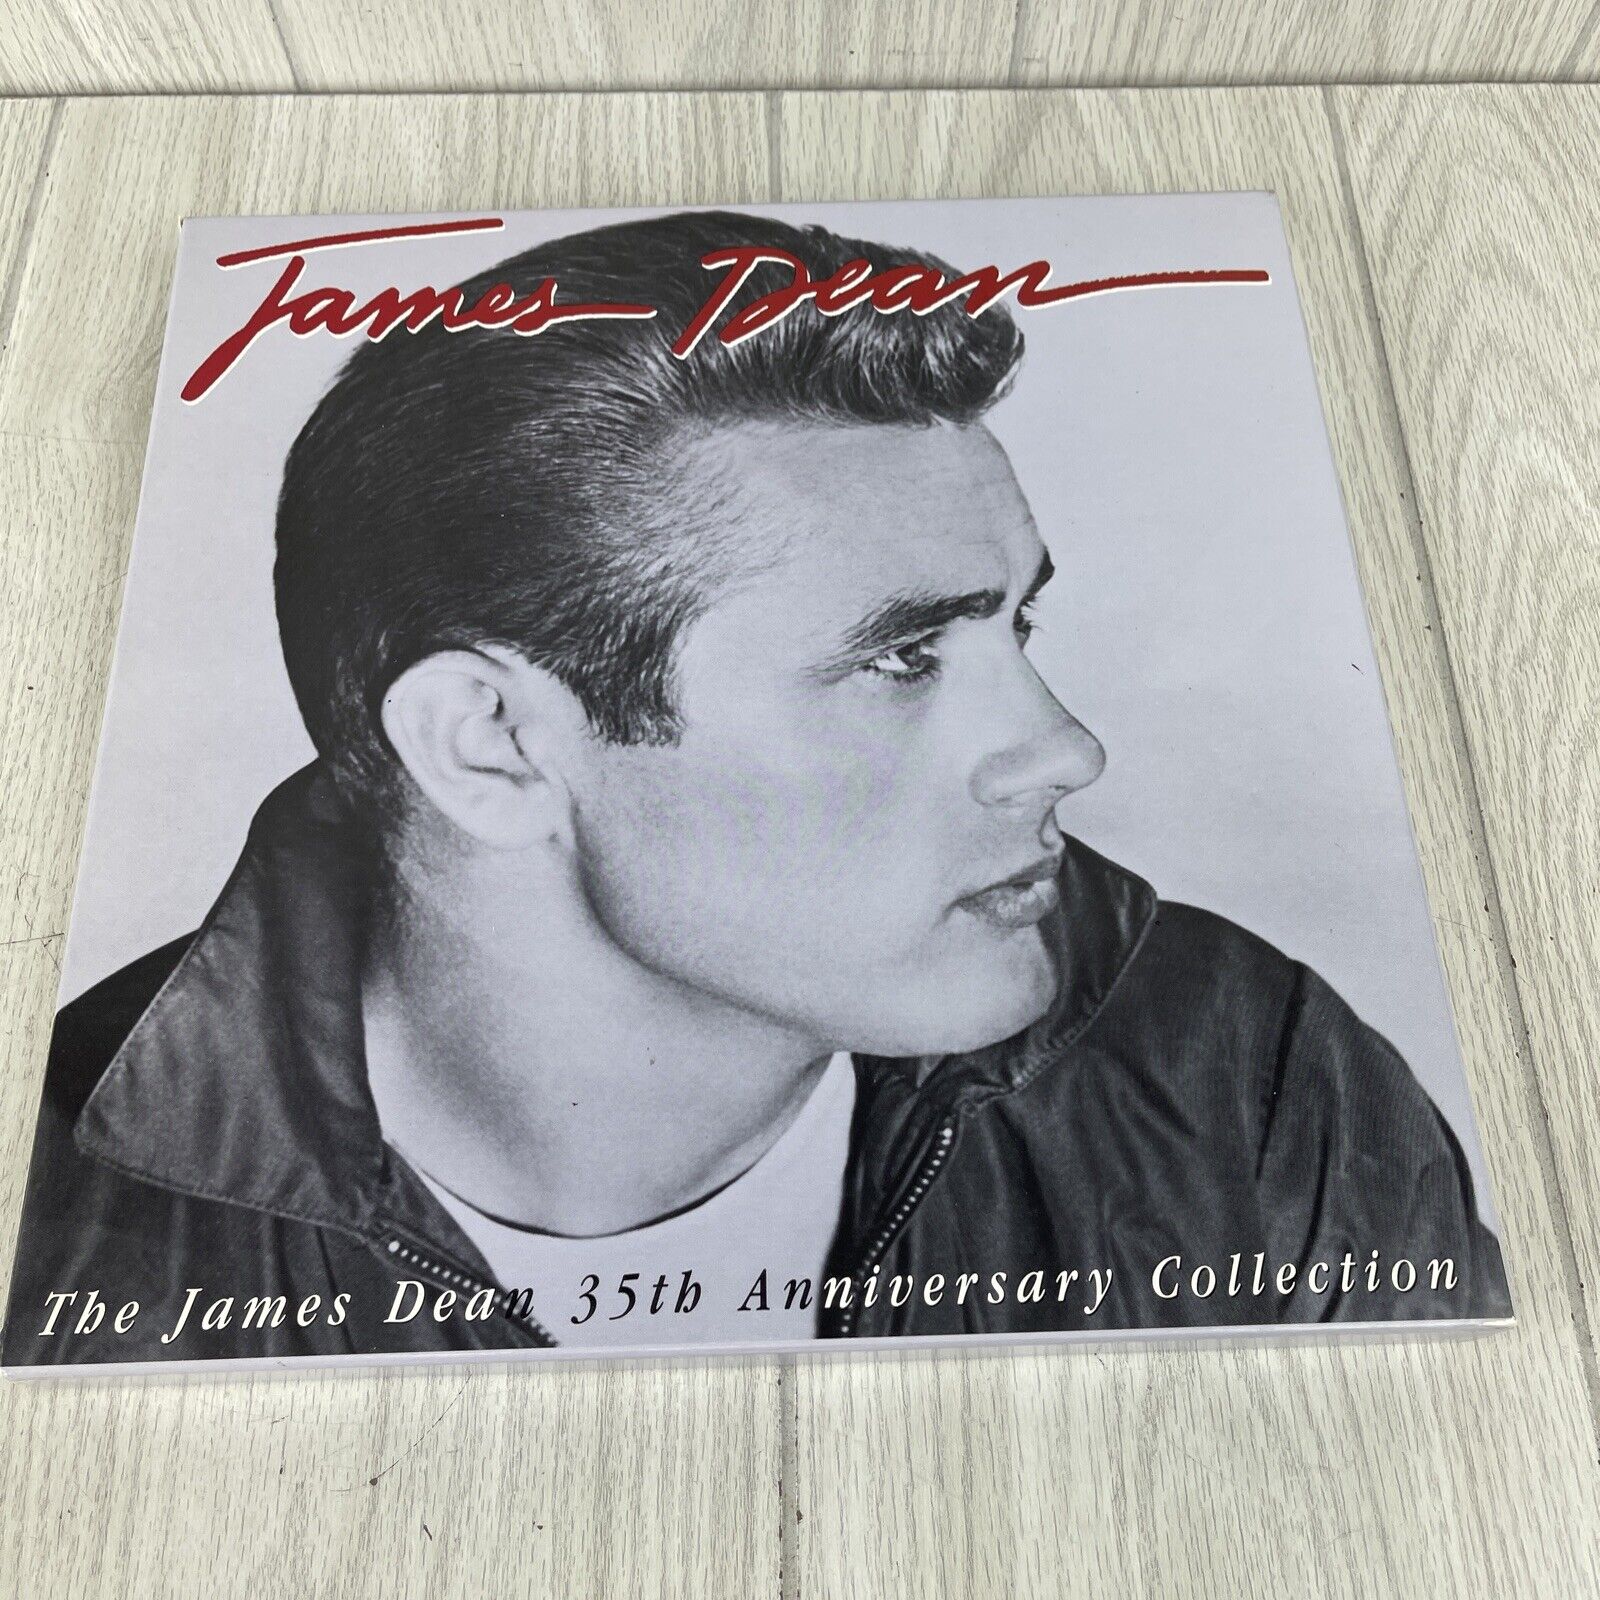 THE JAMES DEAN 35TH ANNIVERSARY COLLECTION 5-Laserdisc LD BOXED SET VERY RARE